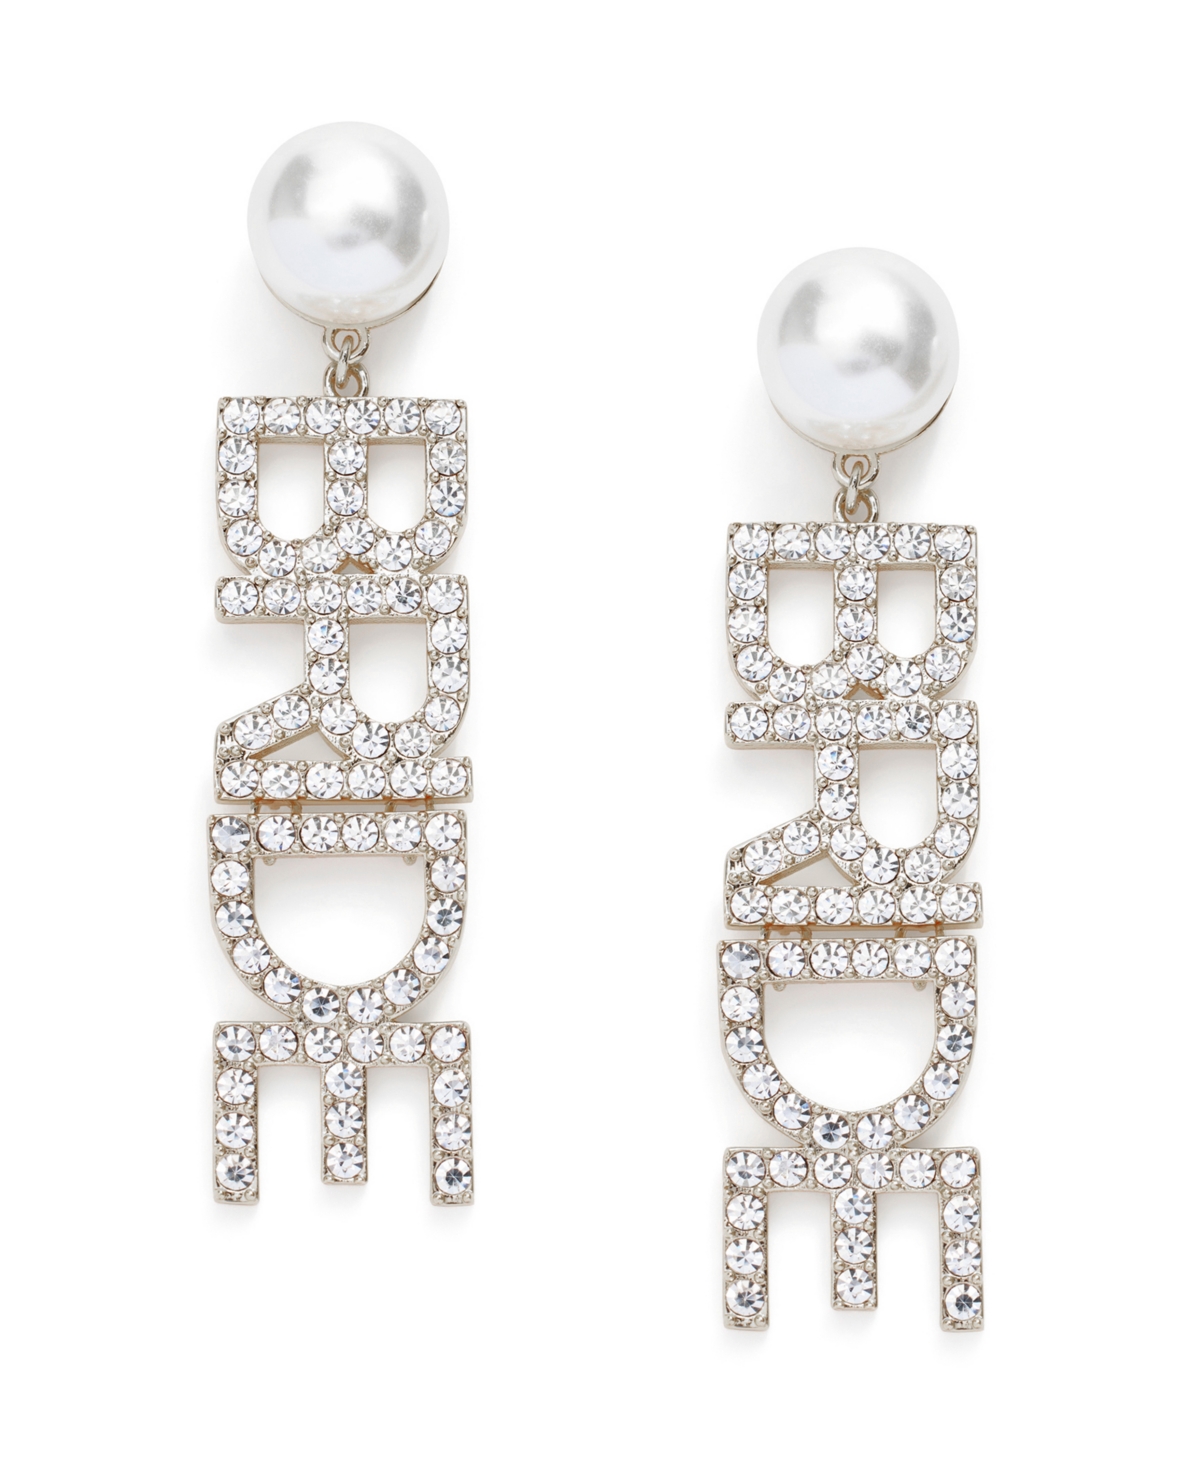 Faux Stone Pave Bride Statement Drop Earrings - Crystal, Gold